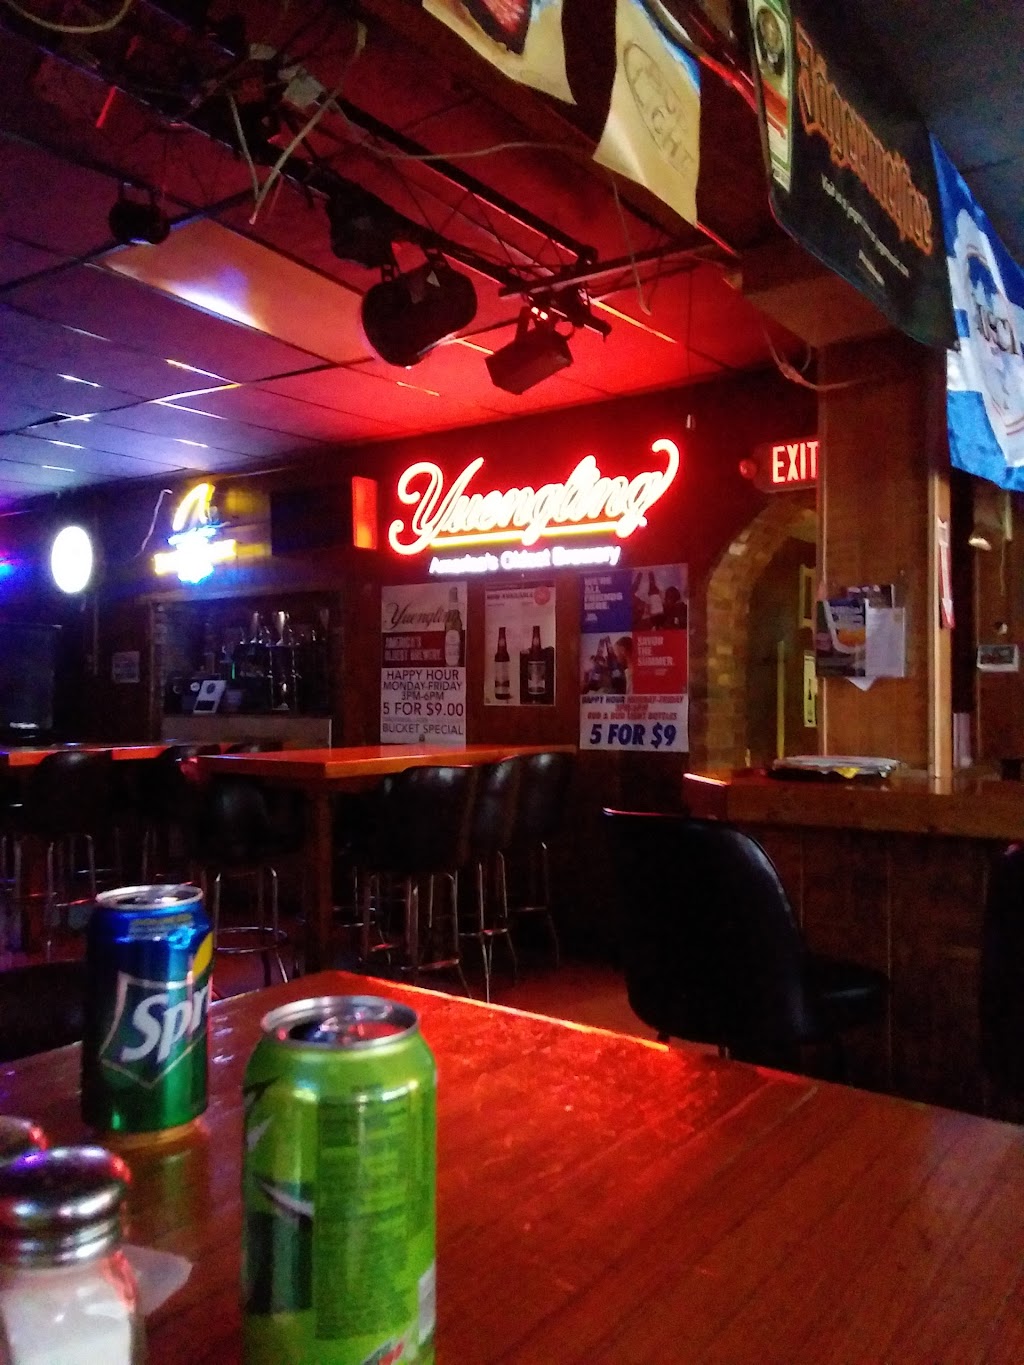 Yummys Bar & Grill | 37 S Mill St, Milford Center, OH 43045 | Phone: (937) 349-8003